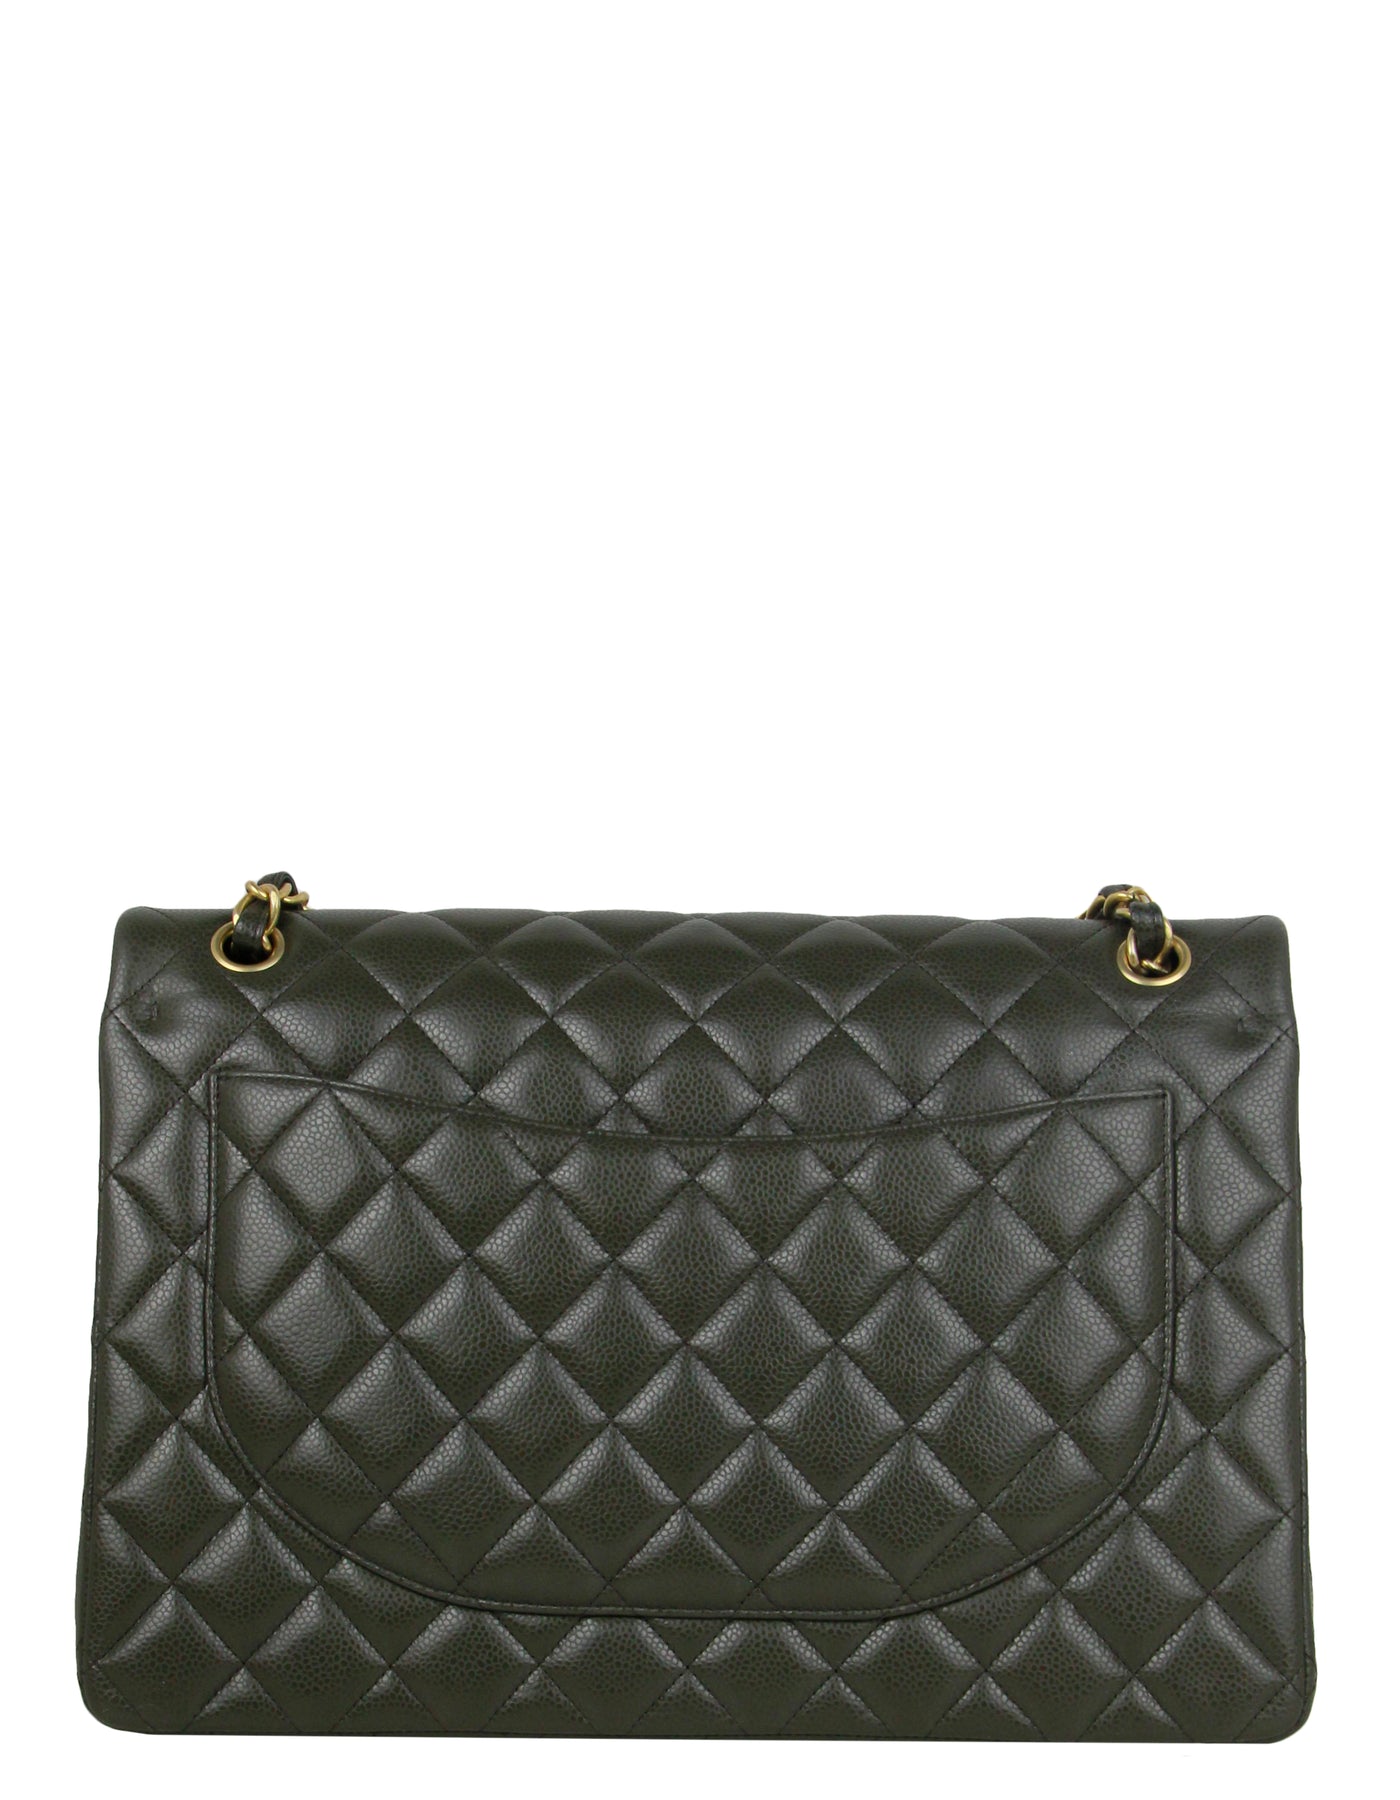 Green Quilted Caviar New Classic Double Flap Maxi